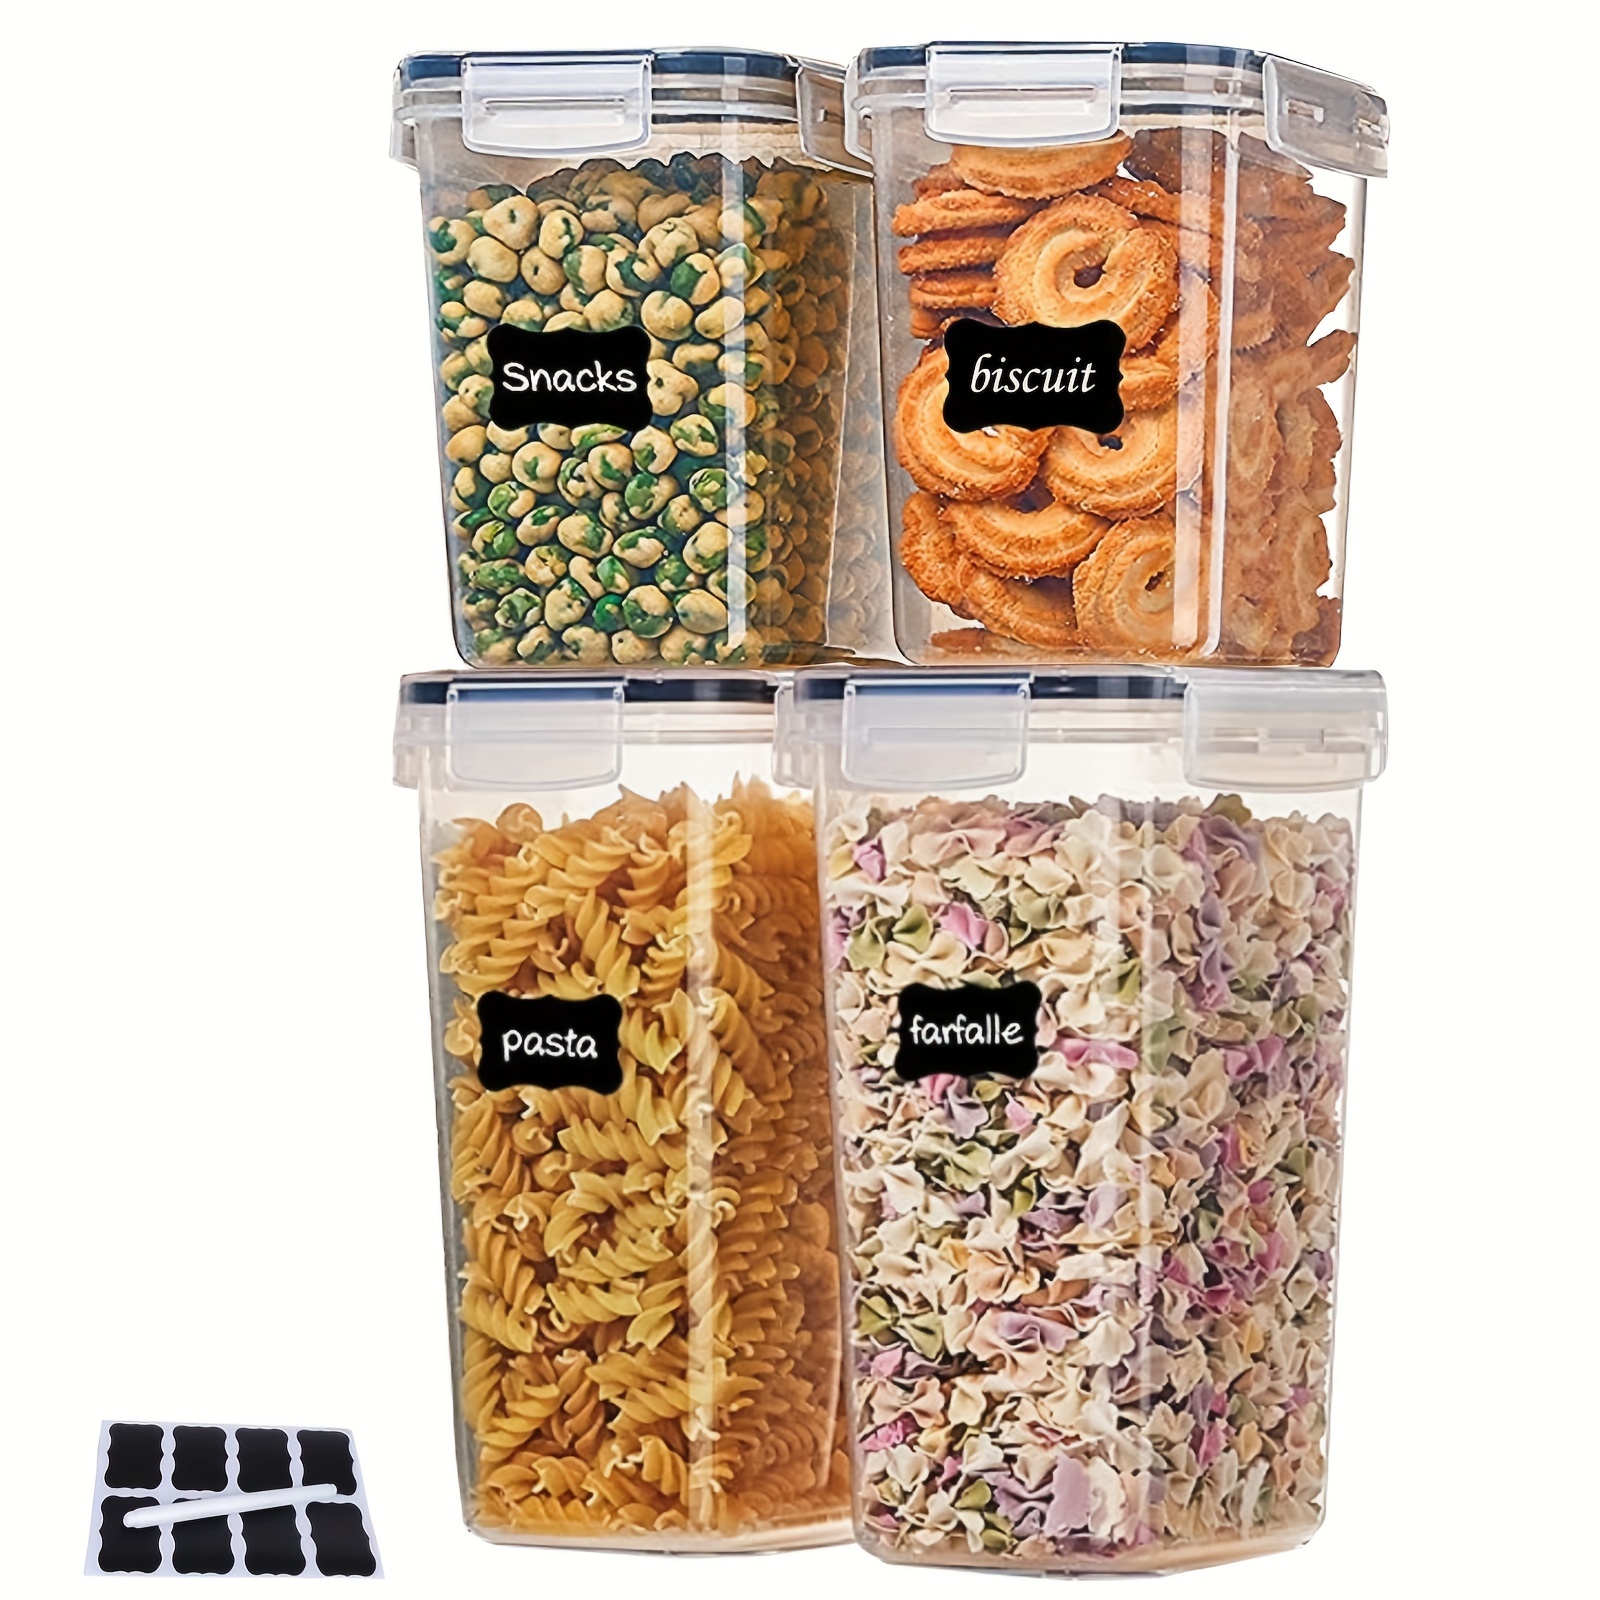 3 pcs BPA-Free Large Food Storage Containers - 5.2L / 176oz + 2*2.5L /84oz  - Airtight Canisters for Flour, Sugar, Baking Supplies - Includes Labels an